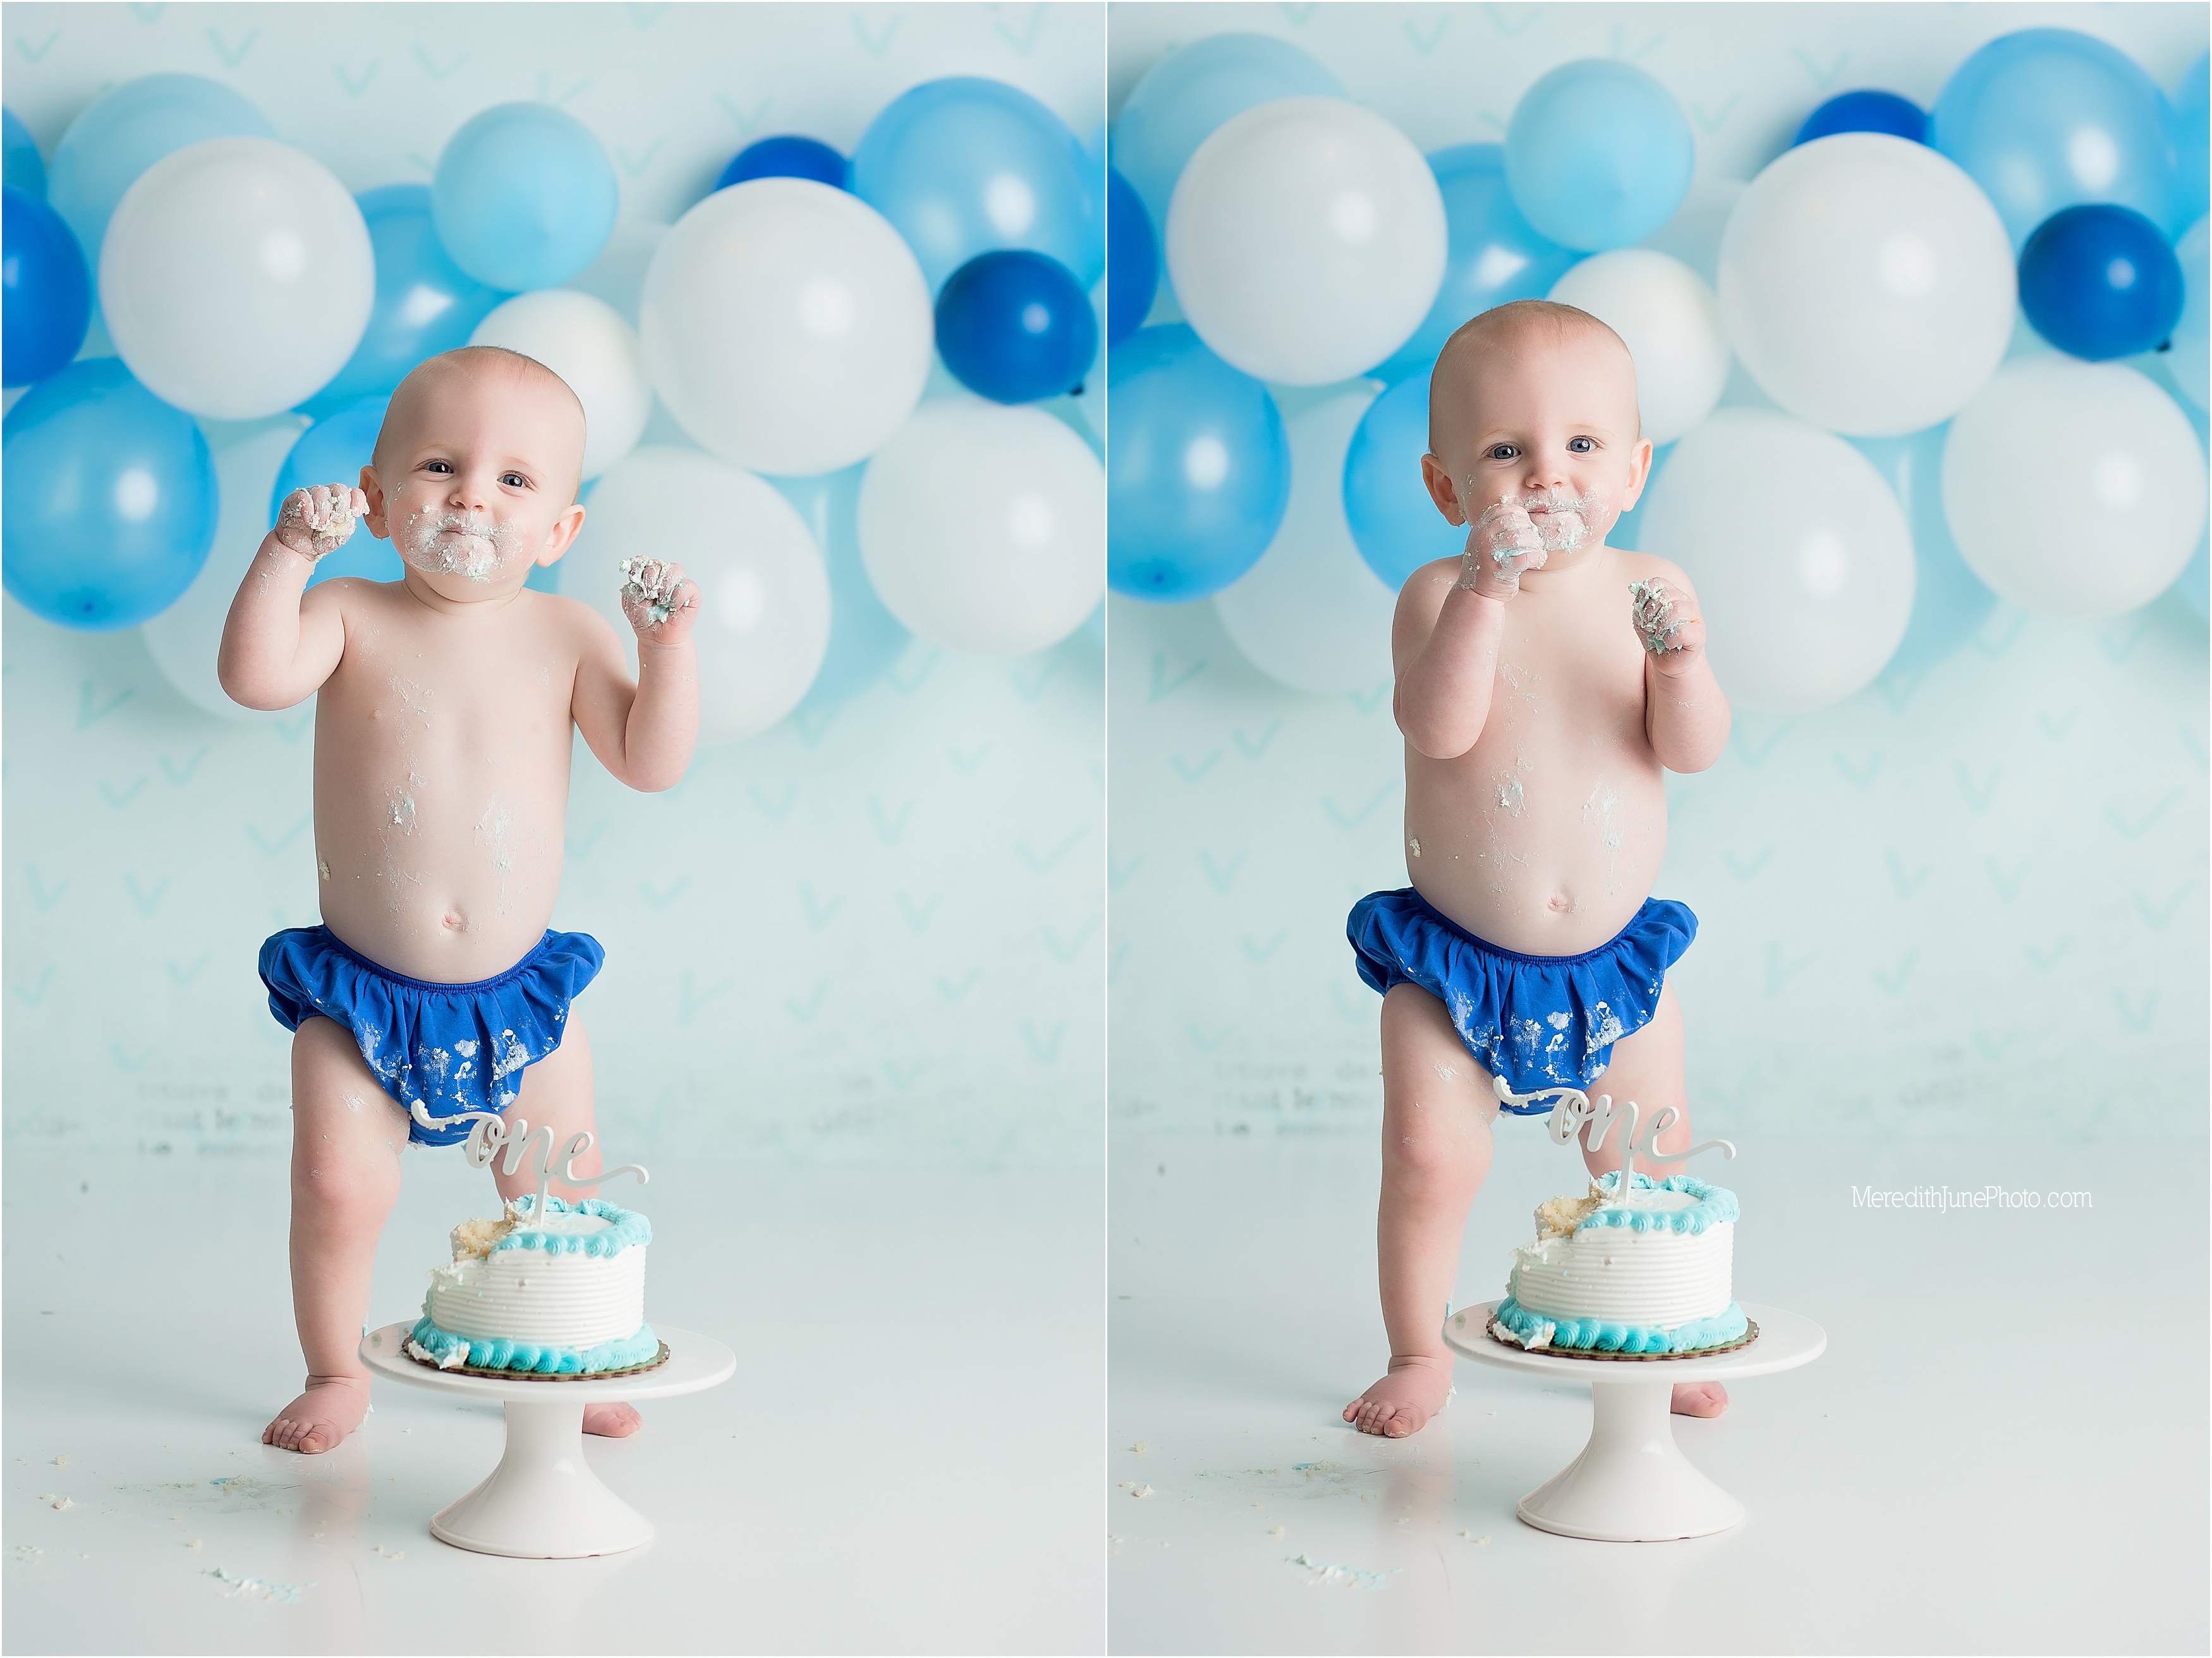 Baby Payne during his cake smash session 